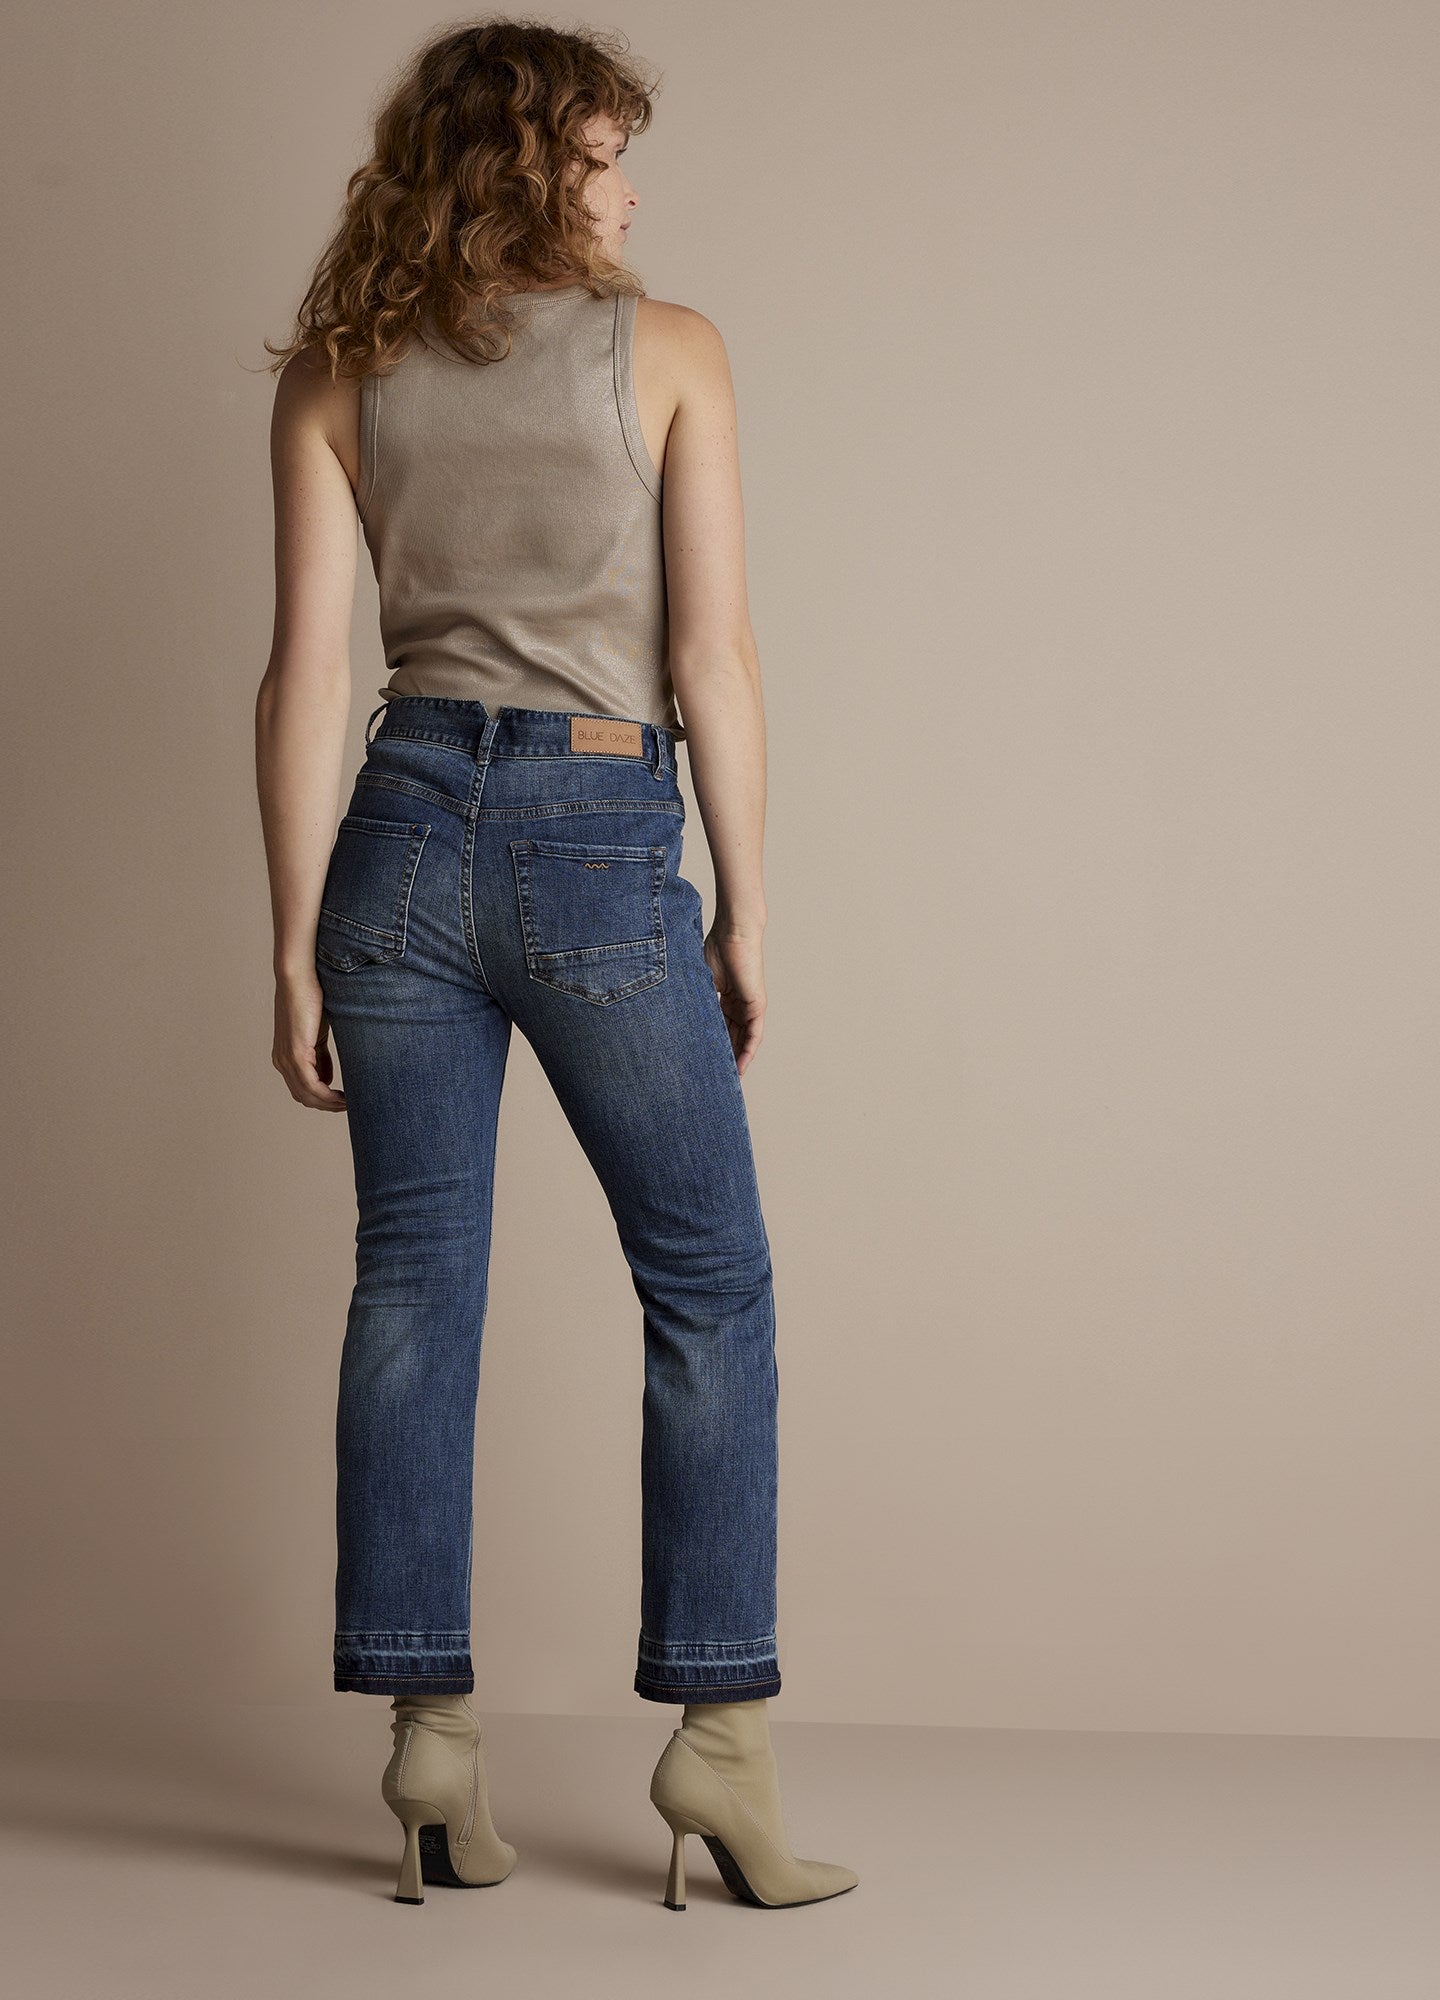 Cropped bootcut jeans